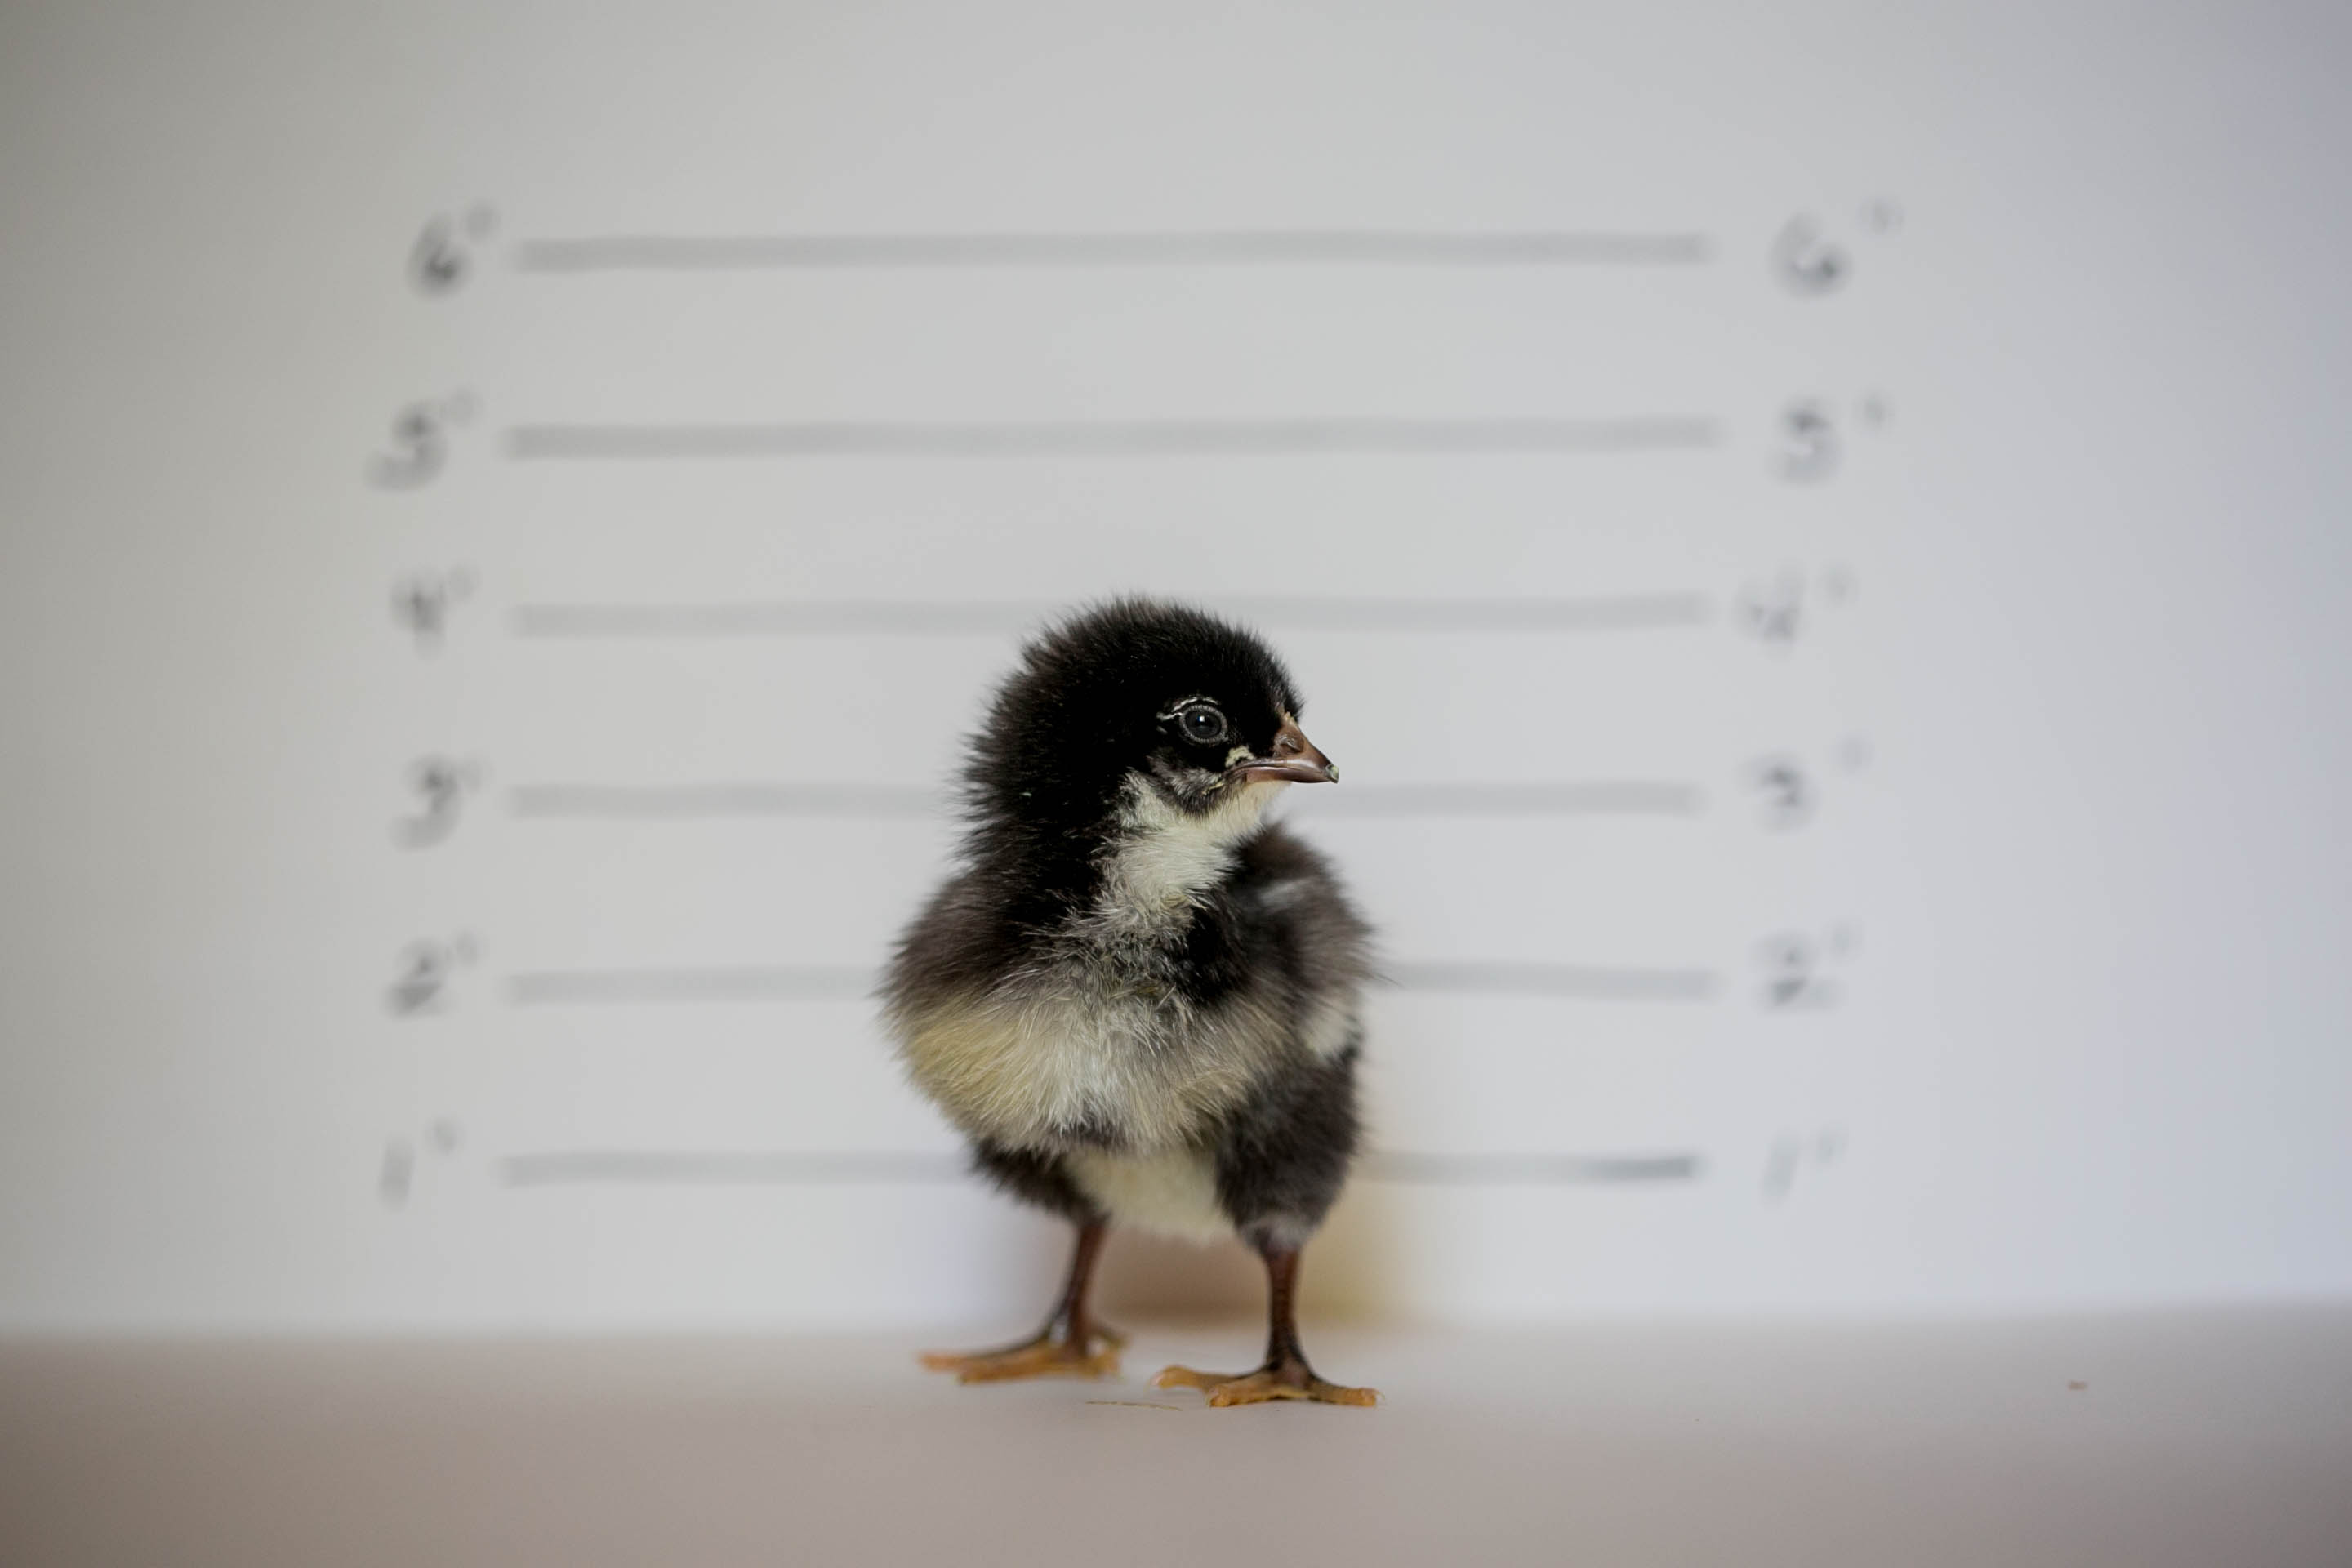 BARRED PLYMOUTH ROCK